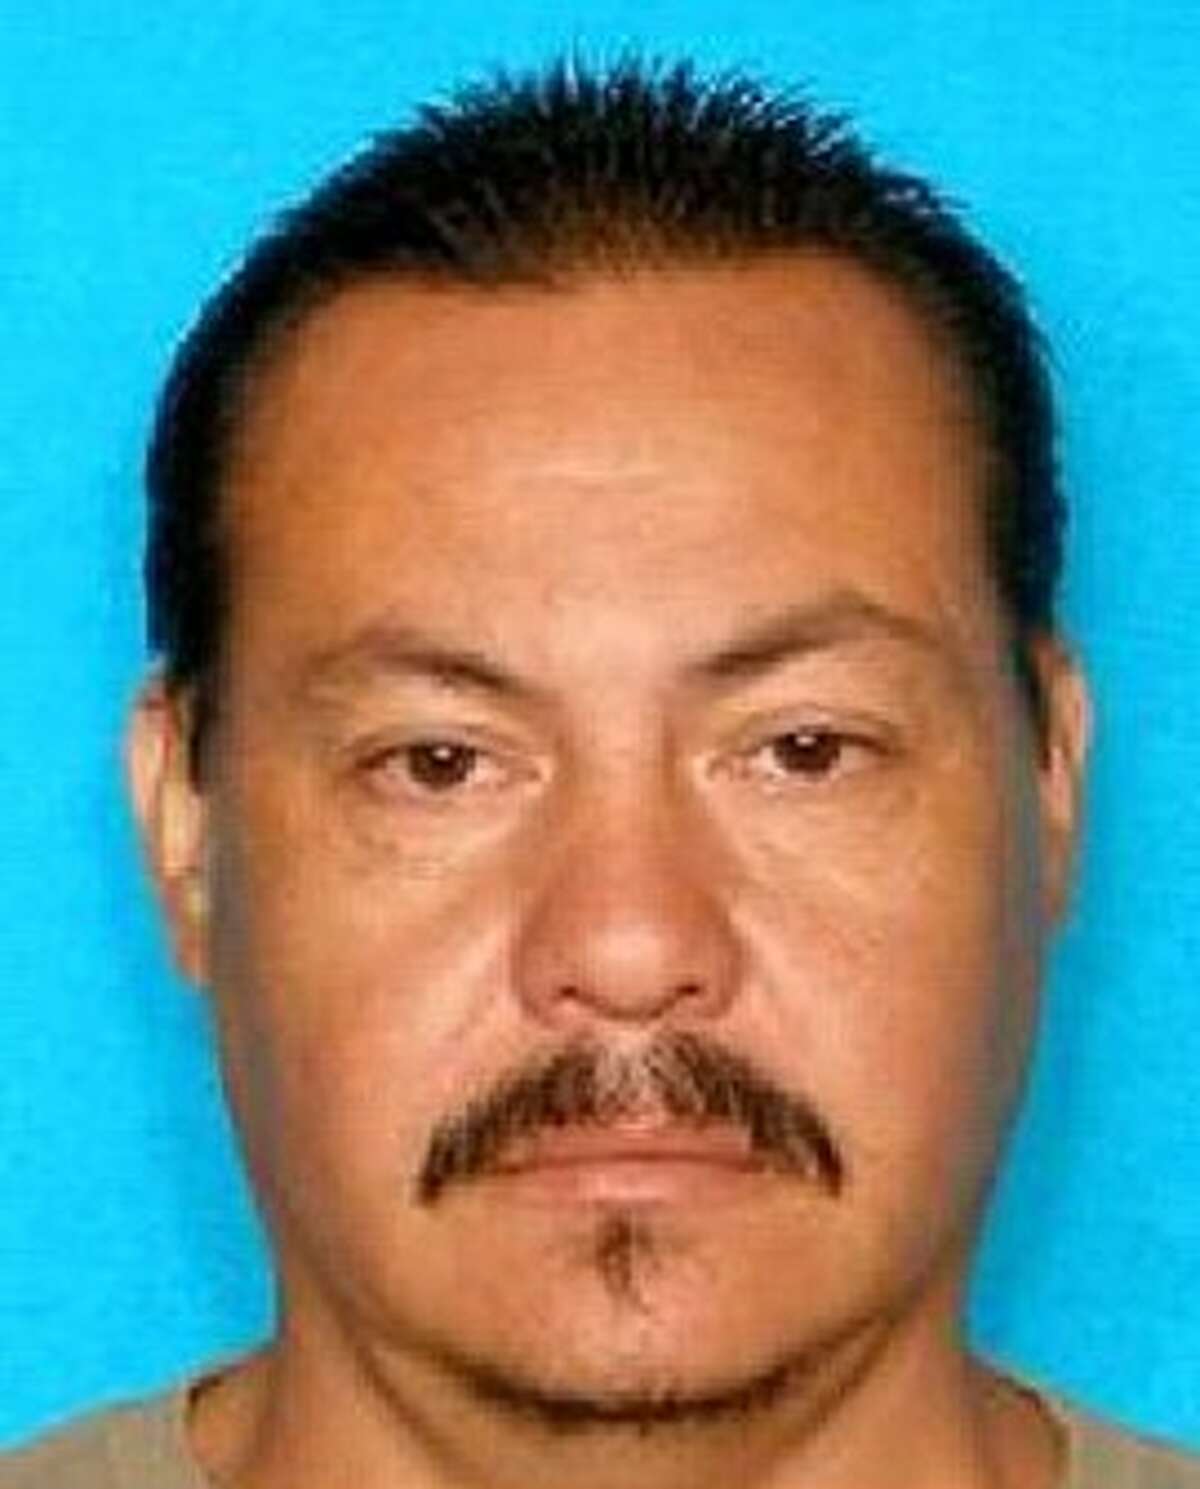 The reward for Jerry Don Holmes, 42, a Texas Ten Most Wanted Sex Offender and this month’s featured fugitive, has been increased to $13,000 for information leading to his capture if the tip comes in during the month of June. Holmes is wanted for failure to comply with sex offender registration requirements, assault and bond surrender forfeiture. All tips are guaranteed to be anonymous.